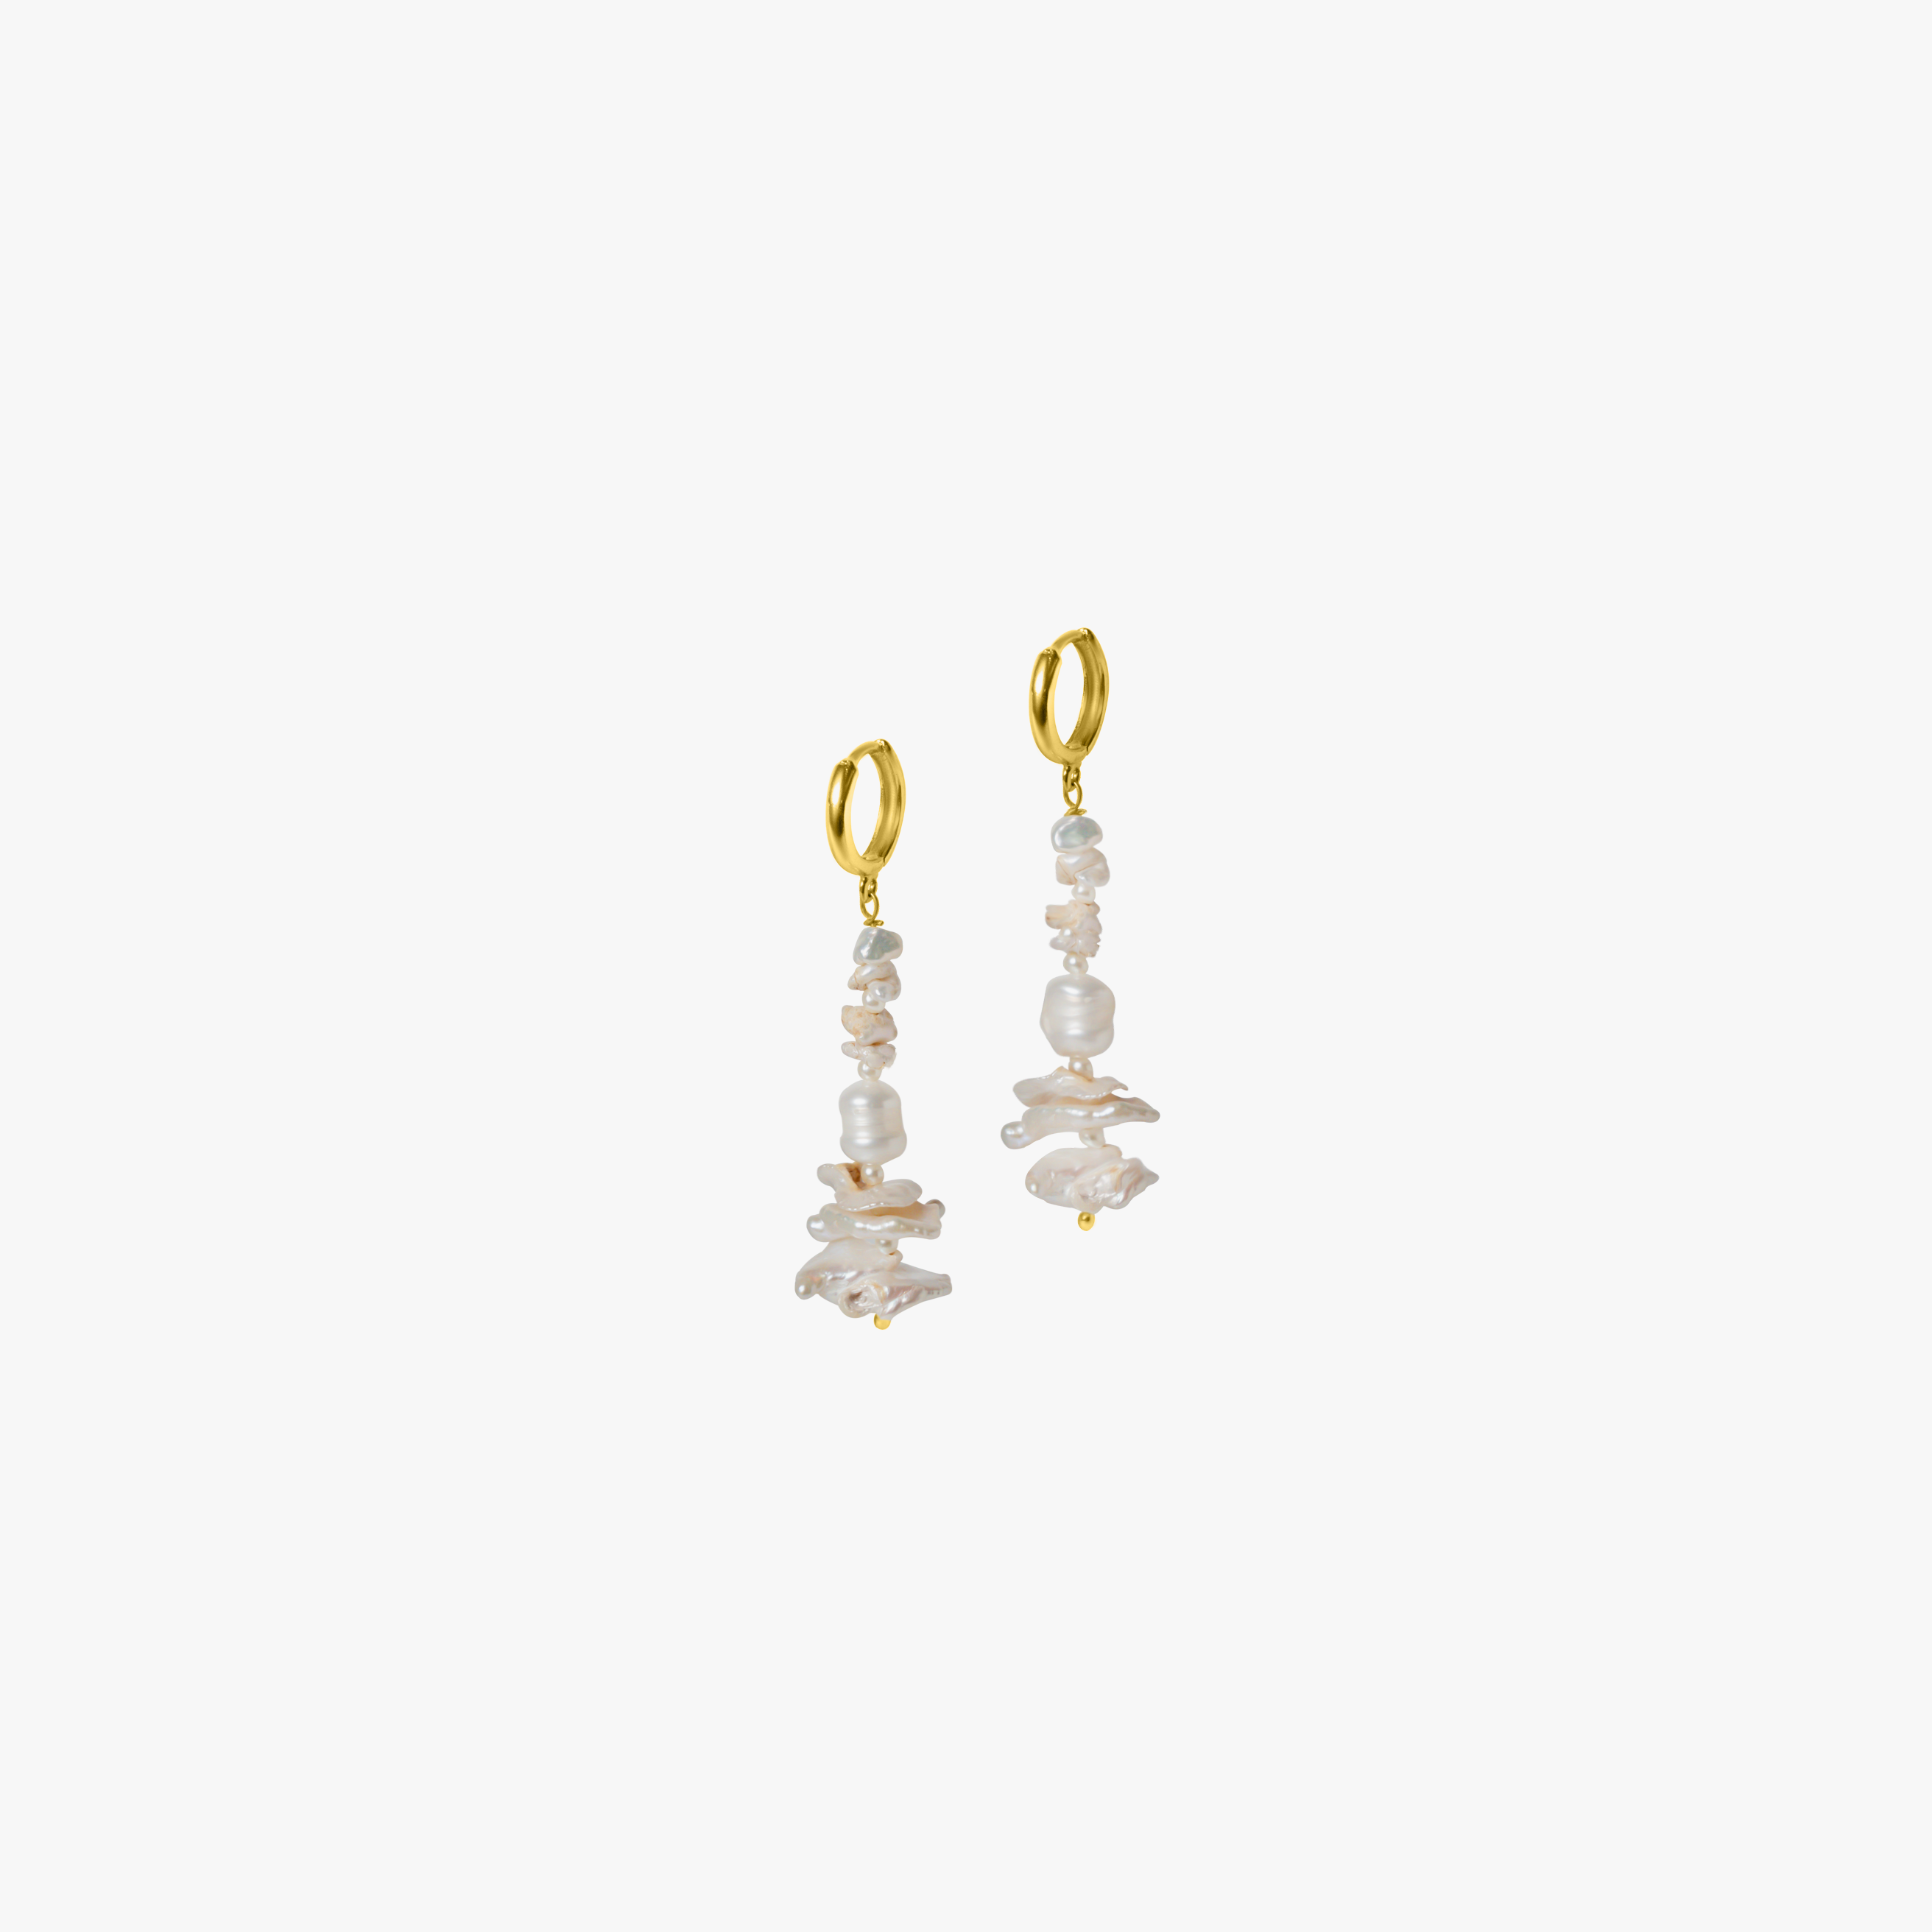 TIDAL PEARL EARRINGS , a product by Equiivalence